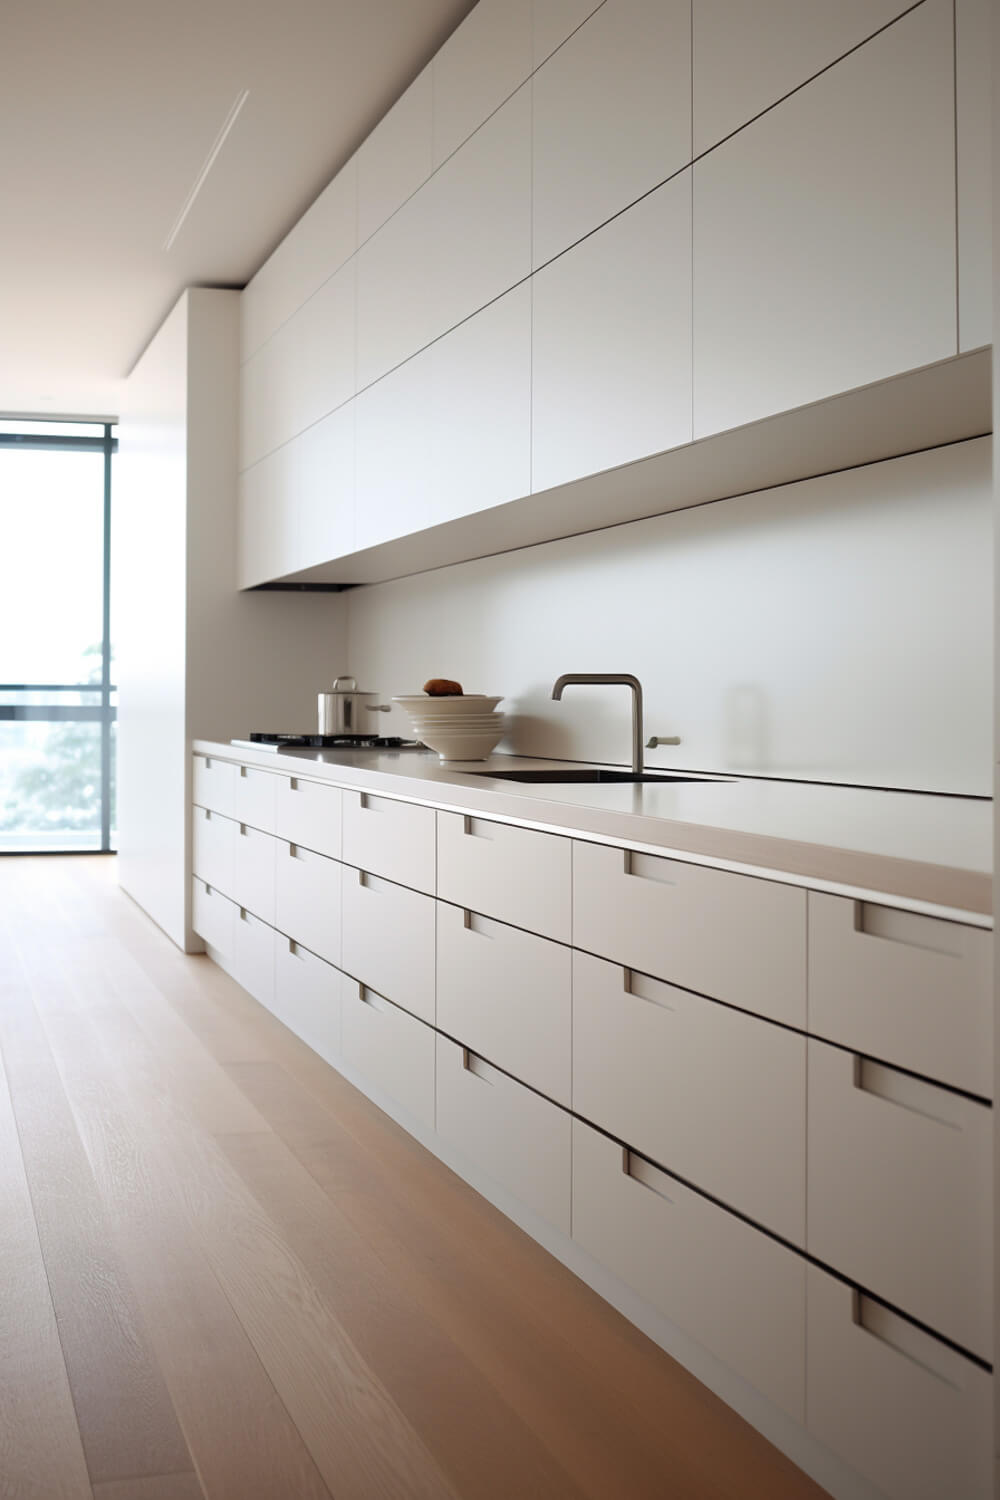 white kitchen cabinets and drawers without handles, natural wood floors, marble or quartz countertops, modern style